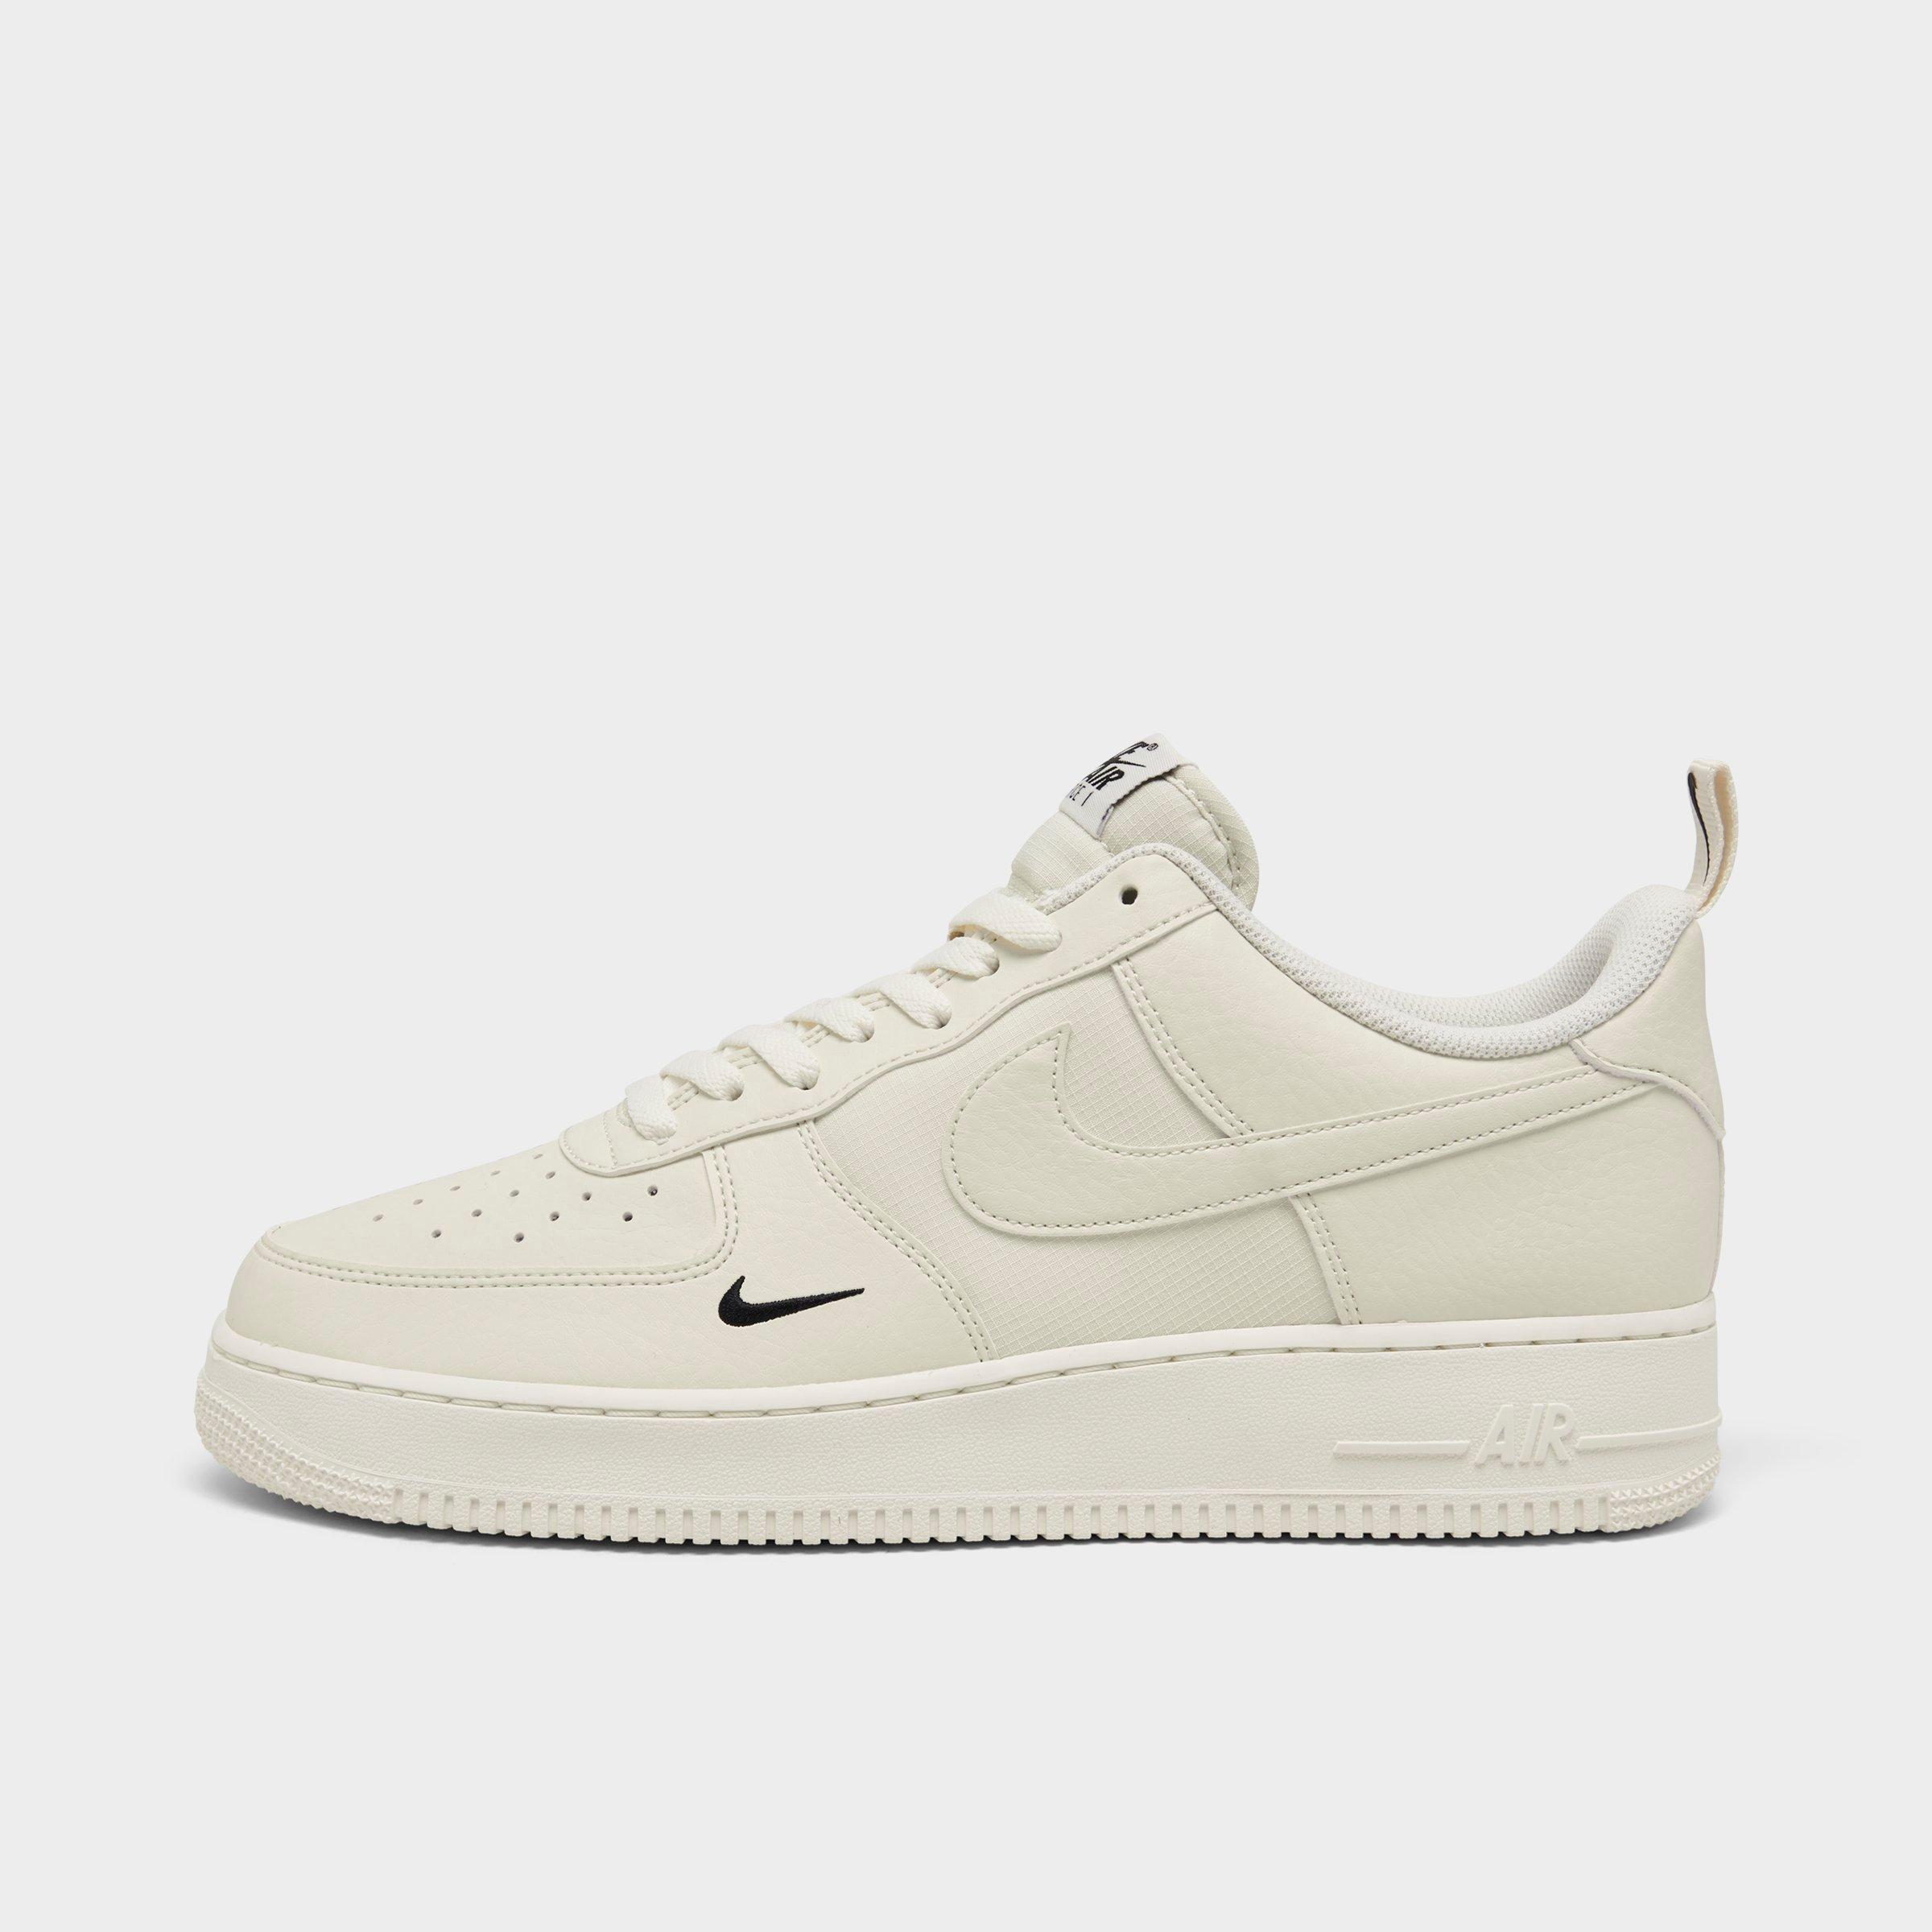 Nike Air Force 1 Low '07 Essential White Beige (Women's)